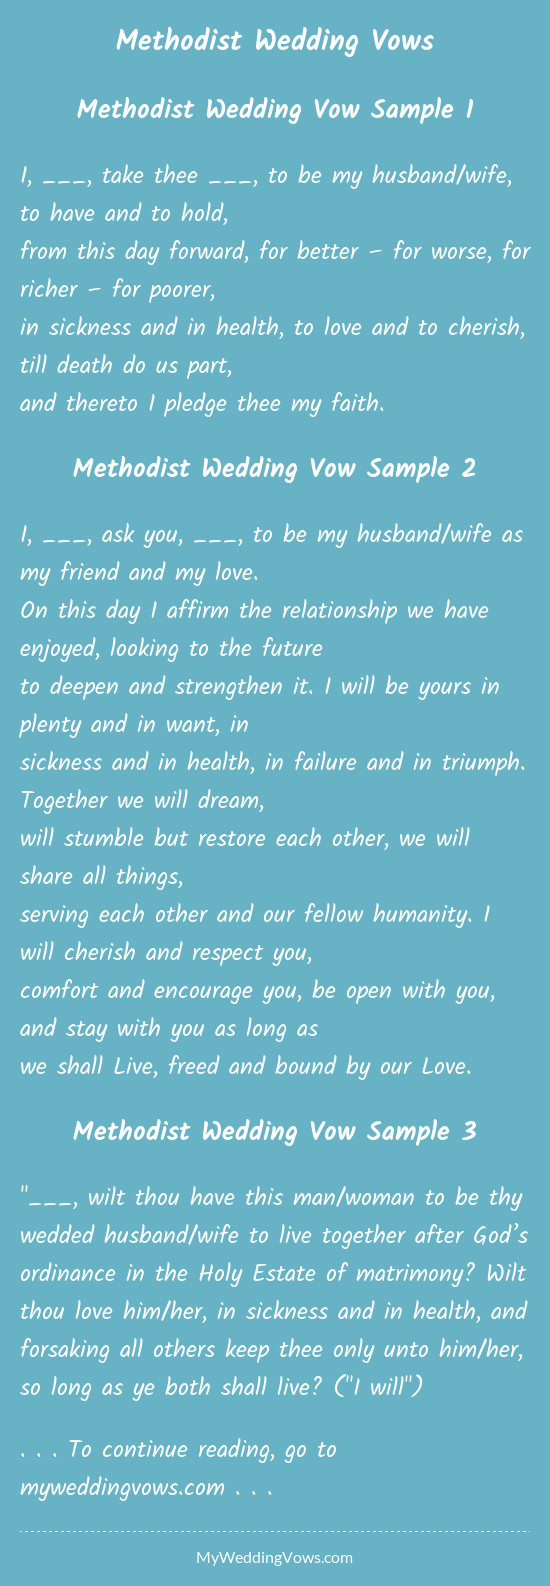 Traditional Wedding Vows For Him
 Others Beautiful Wedding Vows Samples Ideas — Salondegas